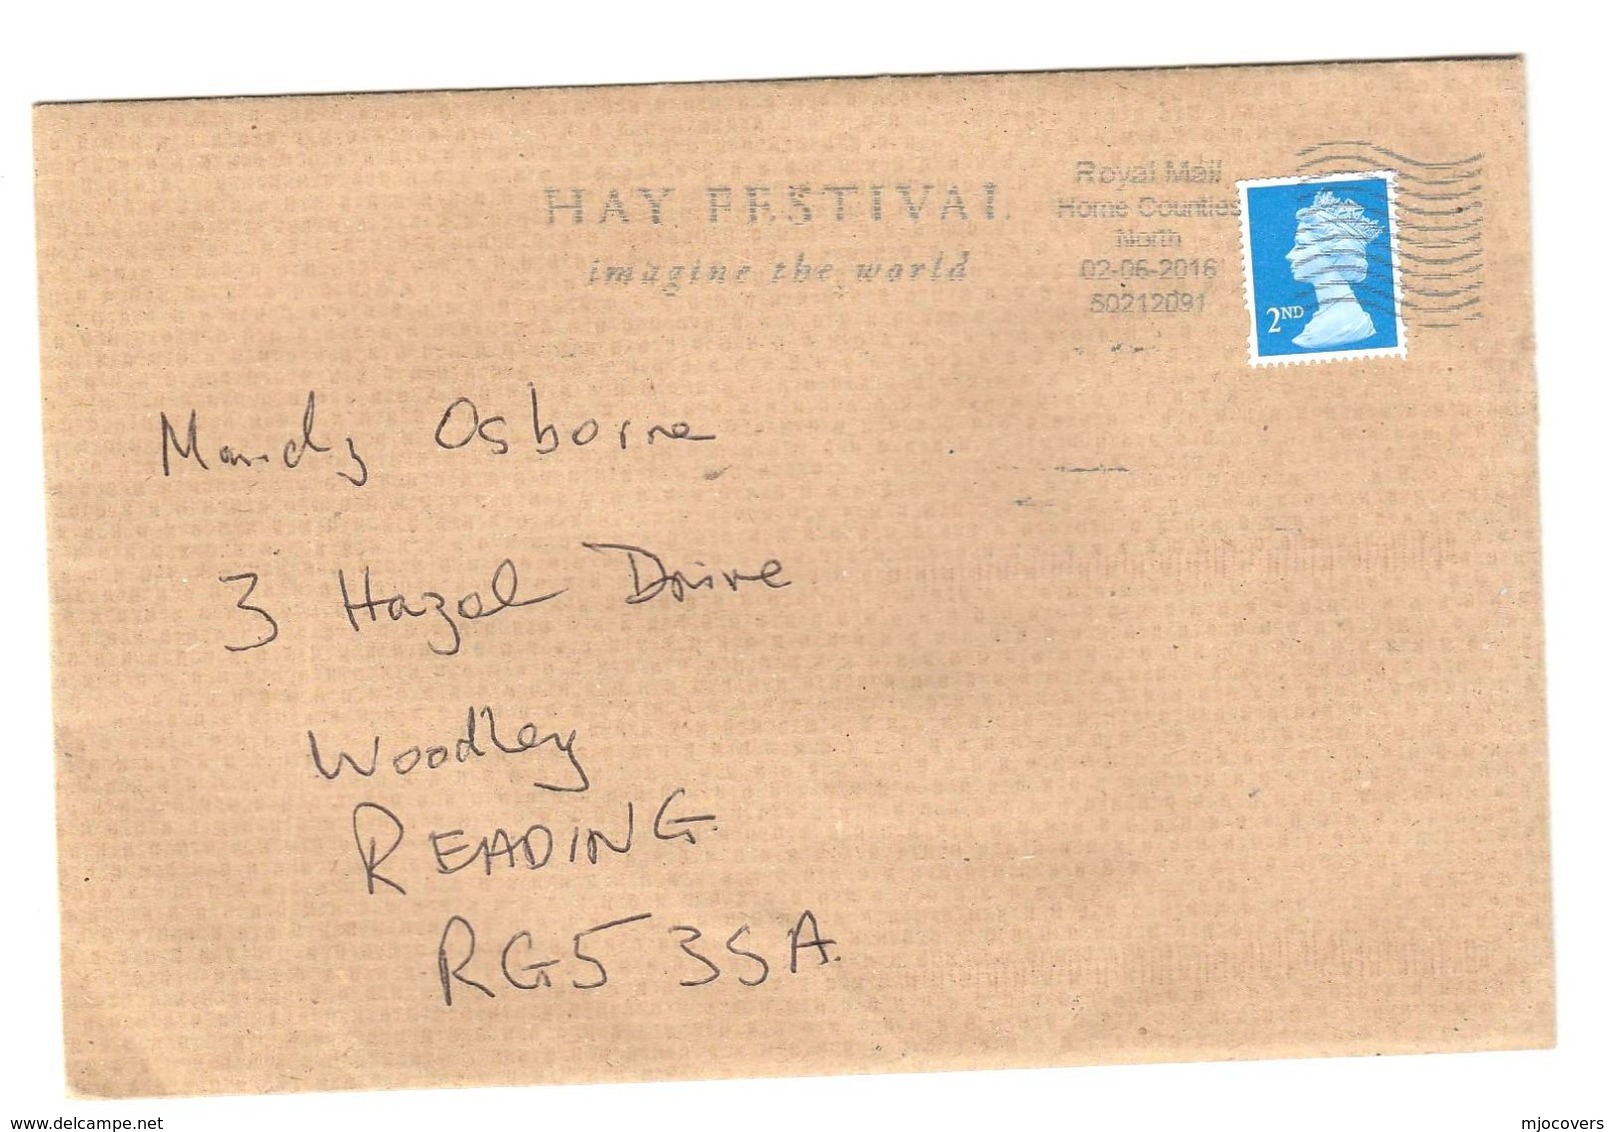 2016 GB COVER SLOGAN Pmk HAY FESTIVAL, IMAGINE THE WORLD Home Counties North , Stamps - Covers & Documents